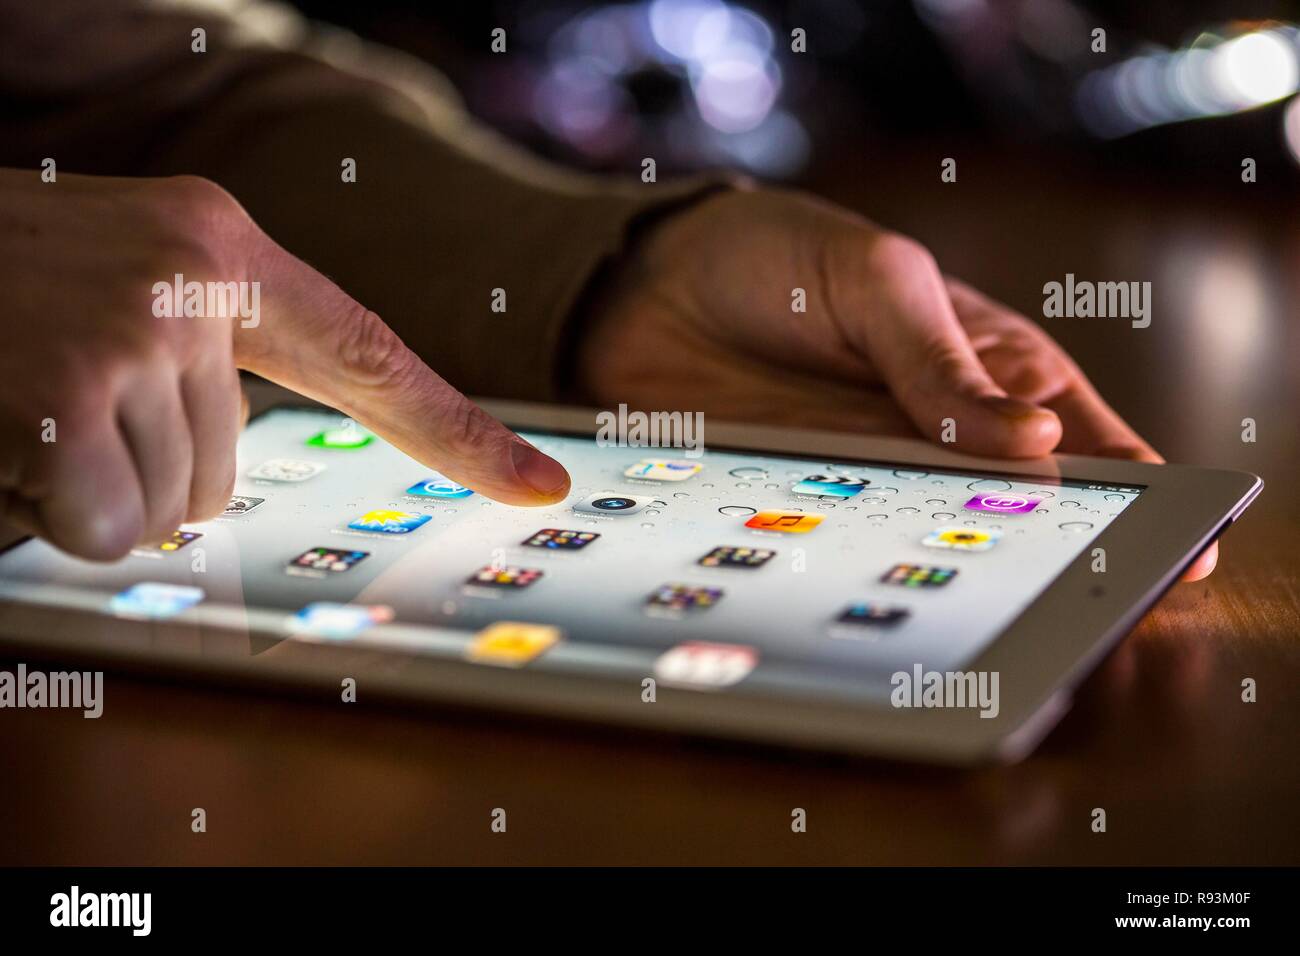 Finger touching the touch screen of an Apple iPad Stock Photo